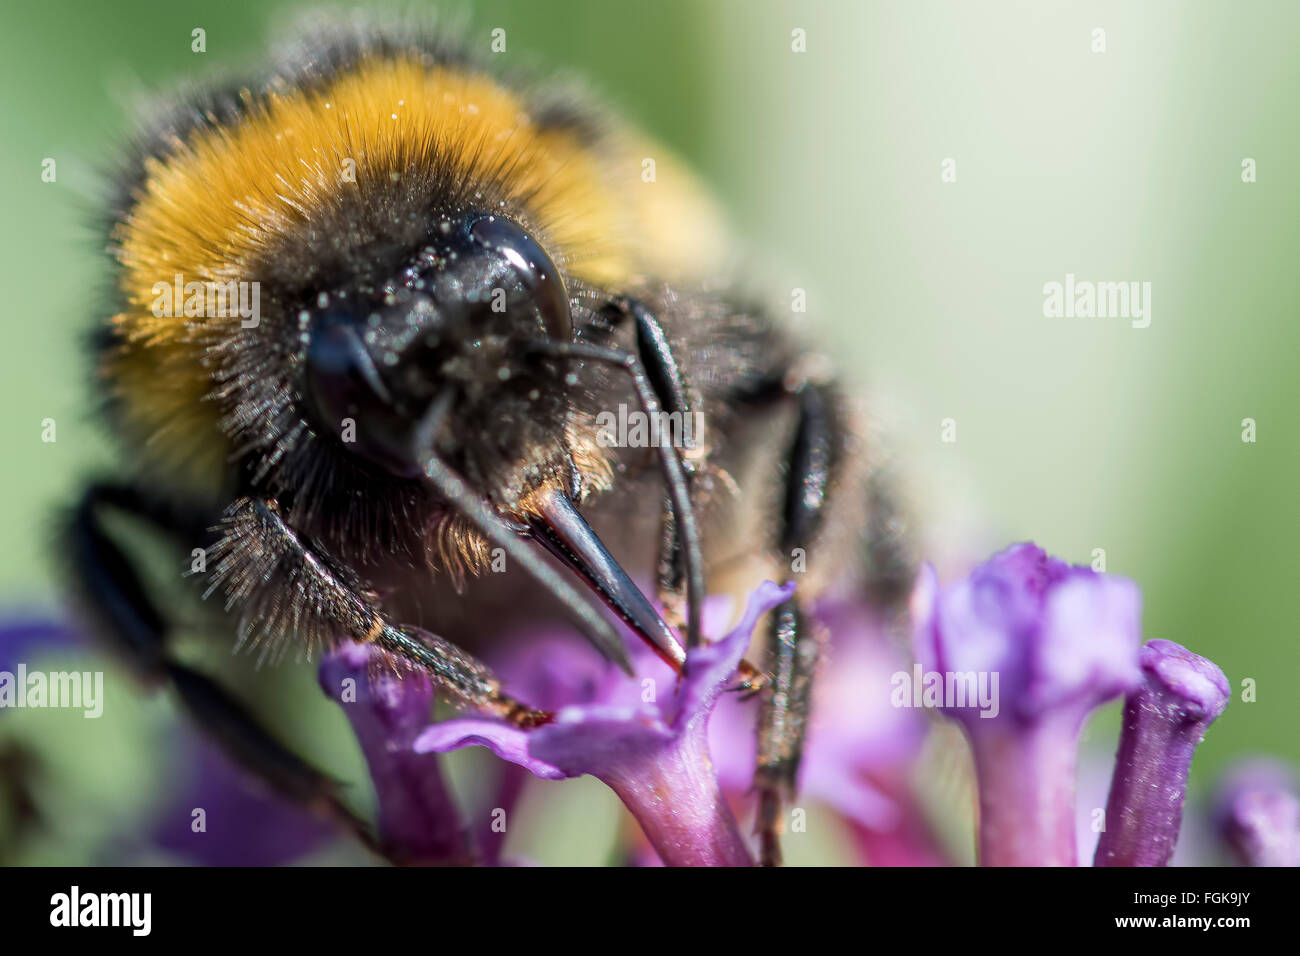 Close-up of Bumble Bee using proboscis to obtain nectar from a bloom. Stock Photo